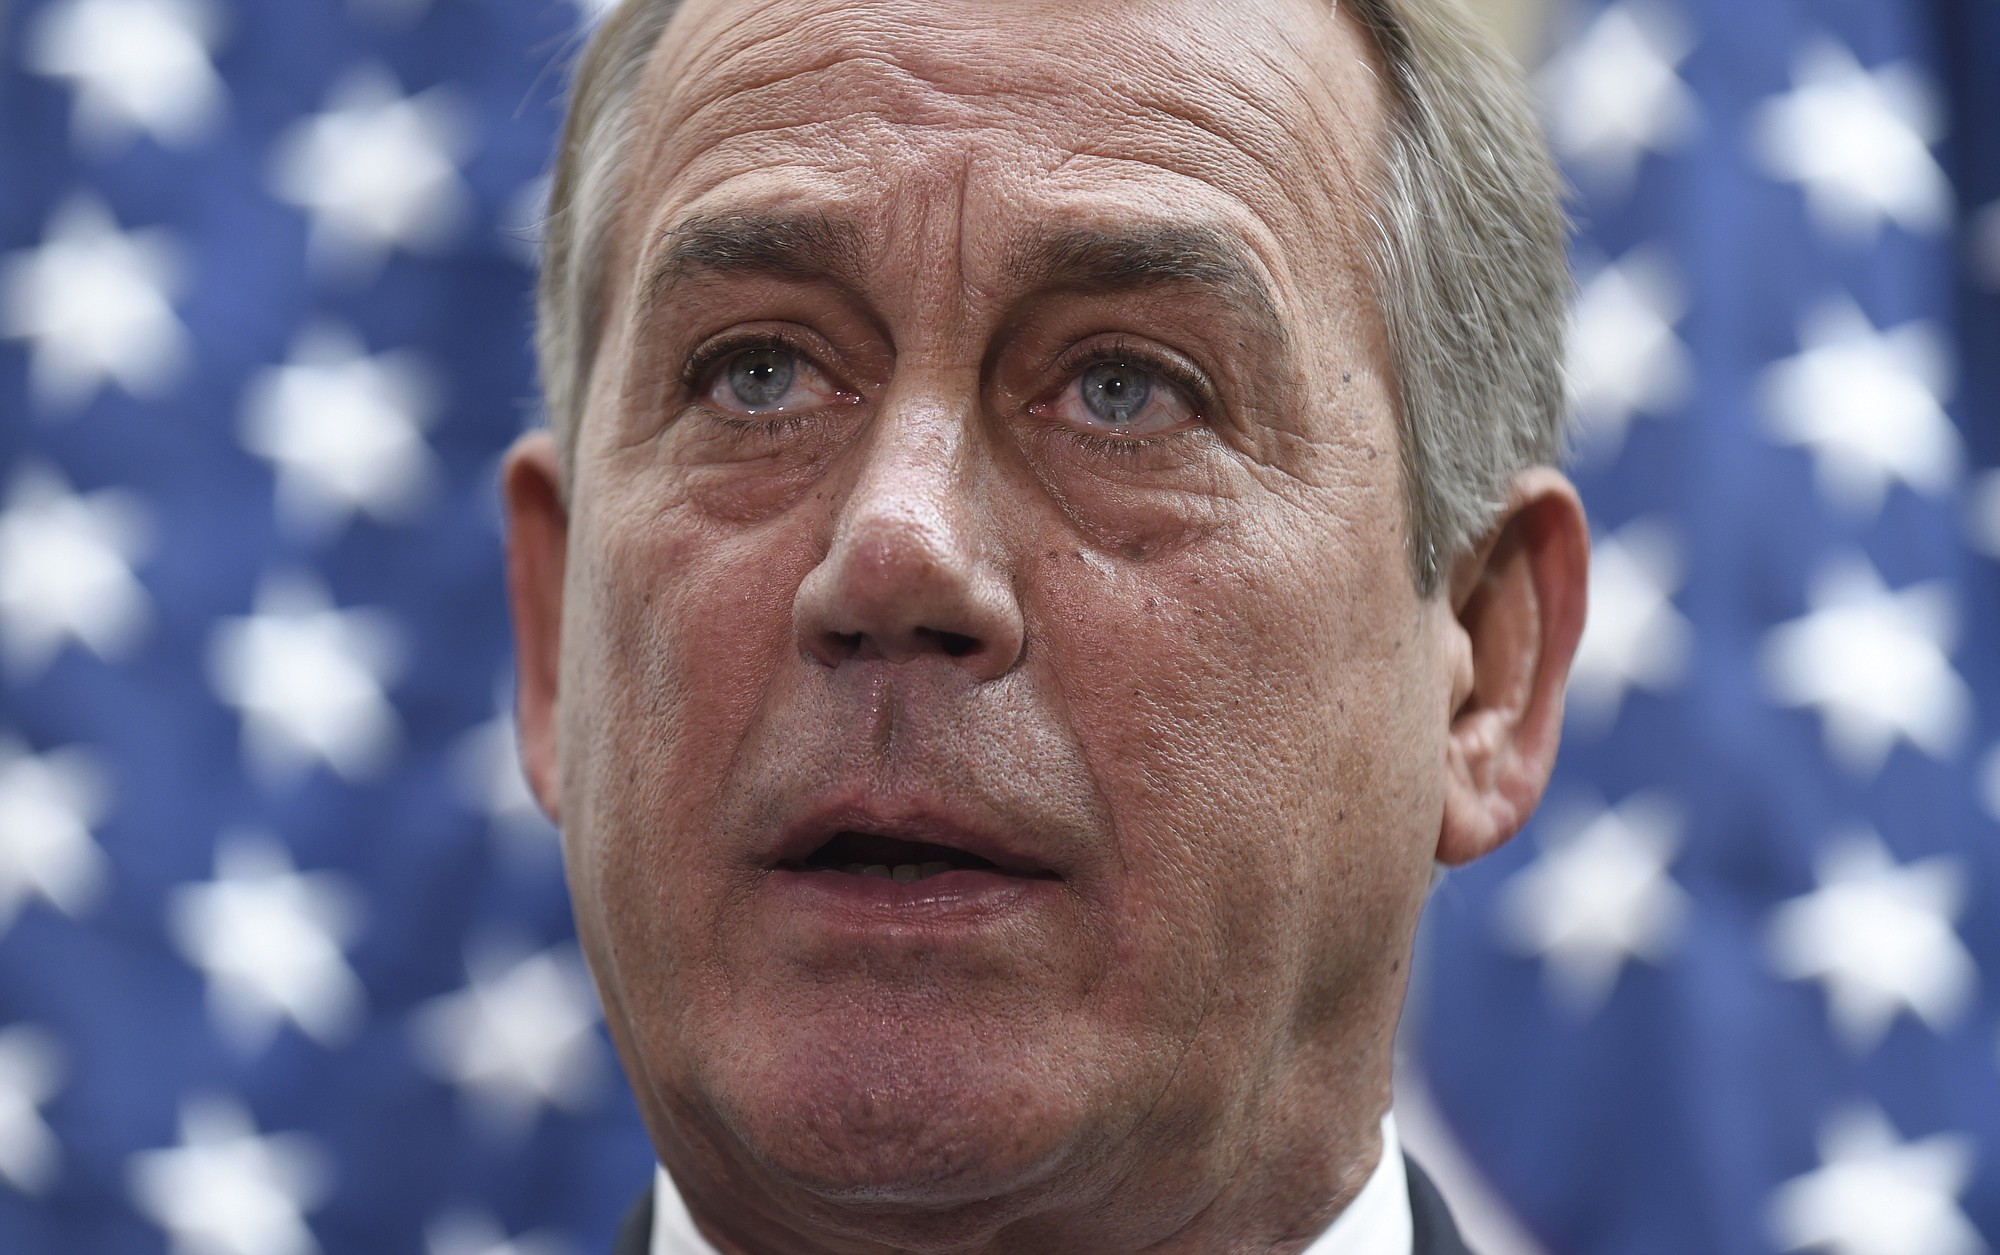 House Speaker John Boehner of Ohio speaks to reporters following a meeting on Capitol Hill in Washington.